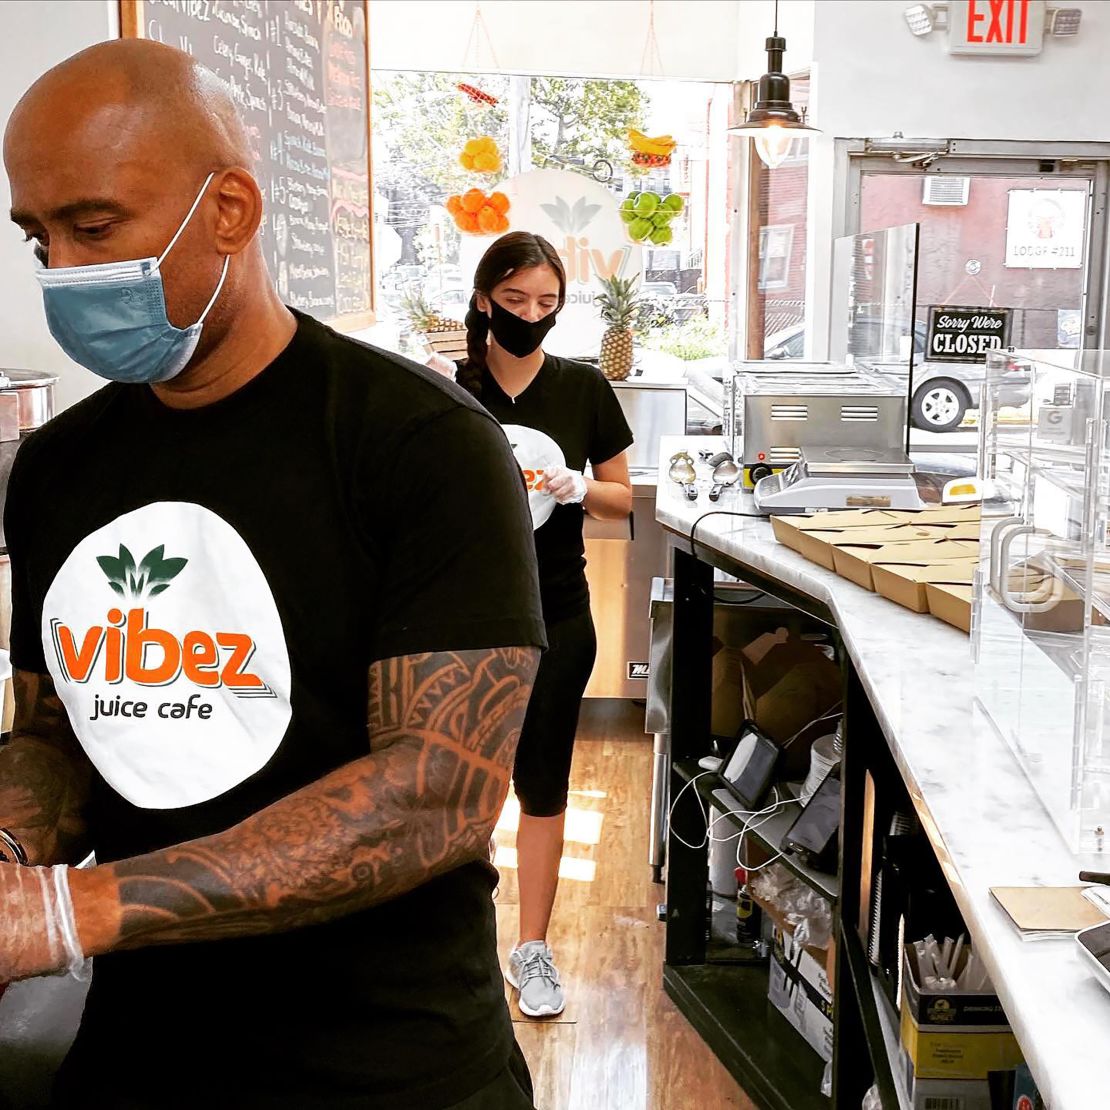 Vibez Juice & Vegan Café in Jersey City, NJ, (pictured) is one of several Black-owned businesses being spotlighted by Google's #BlackOwnedFriday campaign this holiday season.